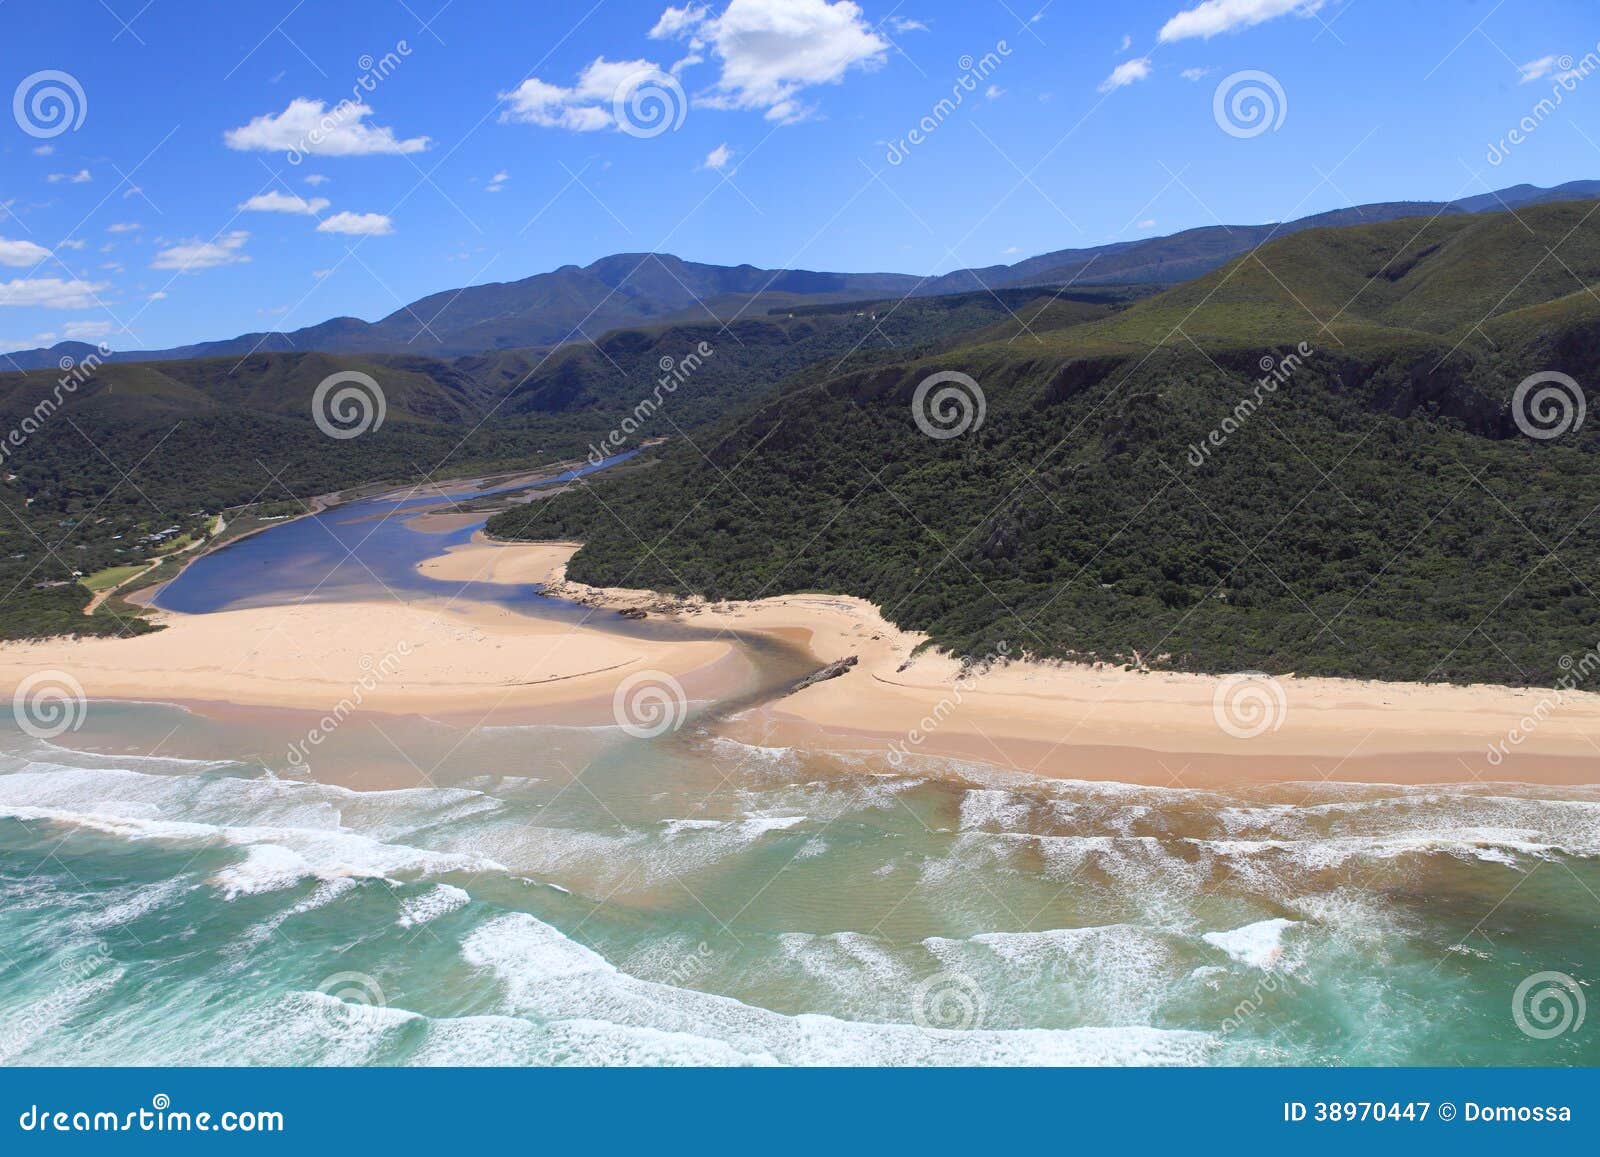 aerial shot of natures valley in the garden route